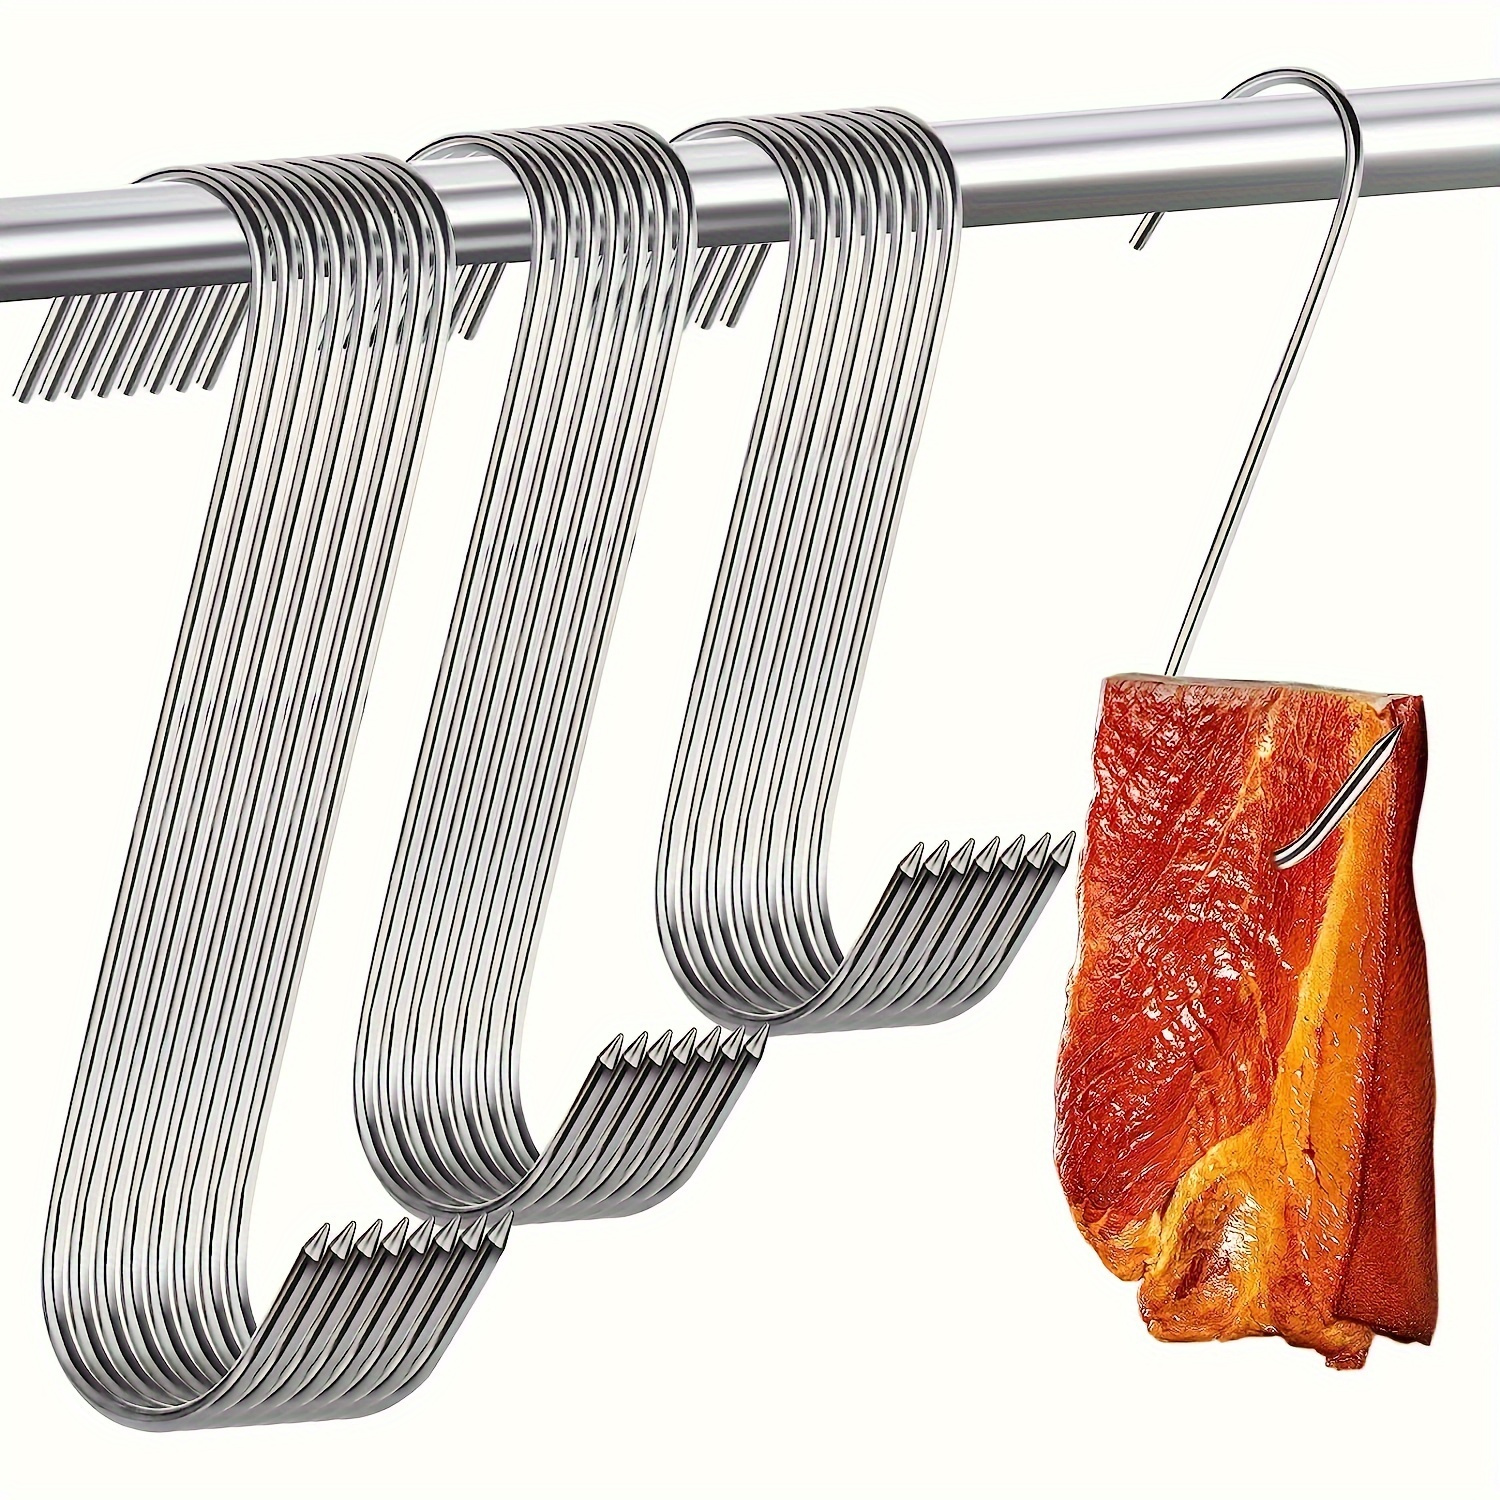 2 PCS STAINLESS STEEL HOOK S BUTCHERS THEM VARIOUS USES FROM 6 to